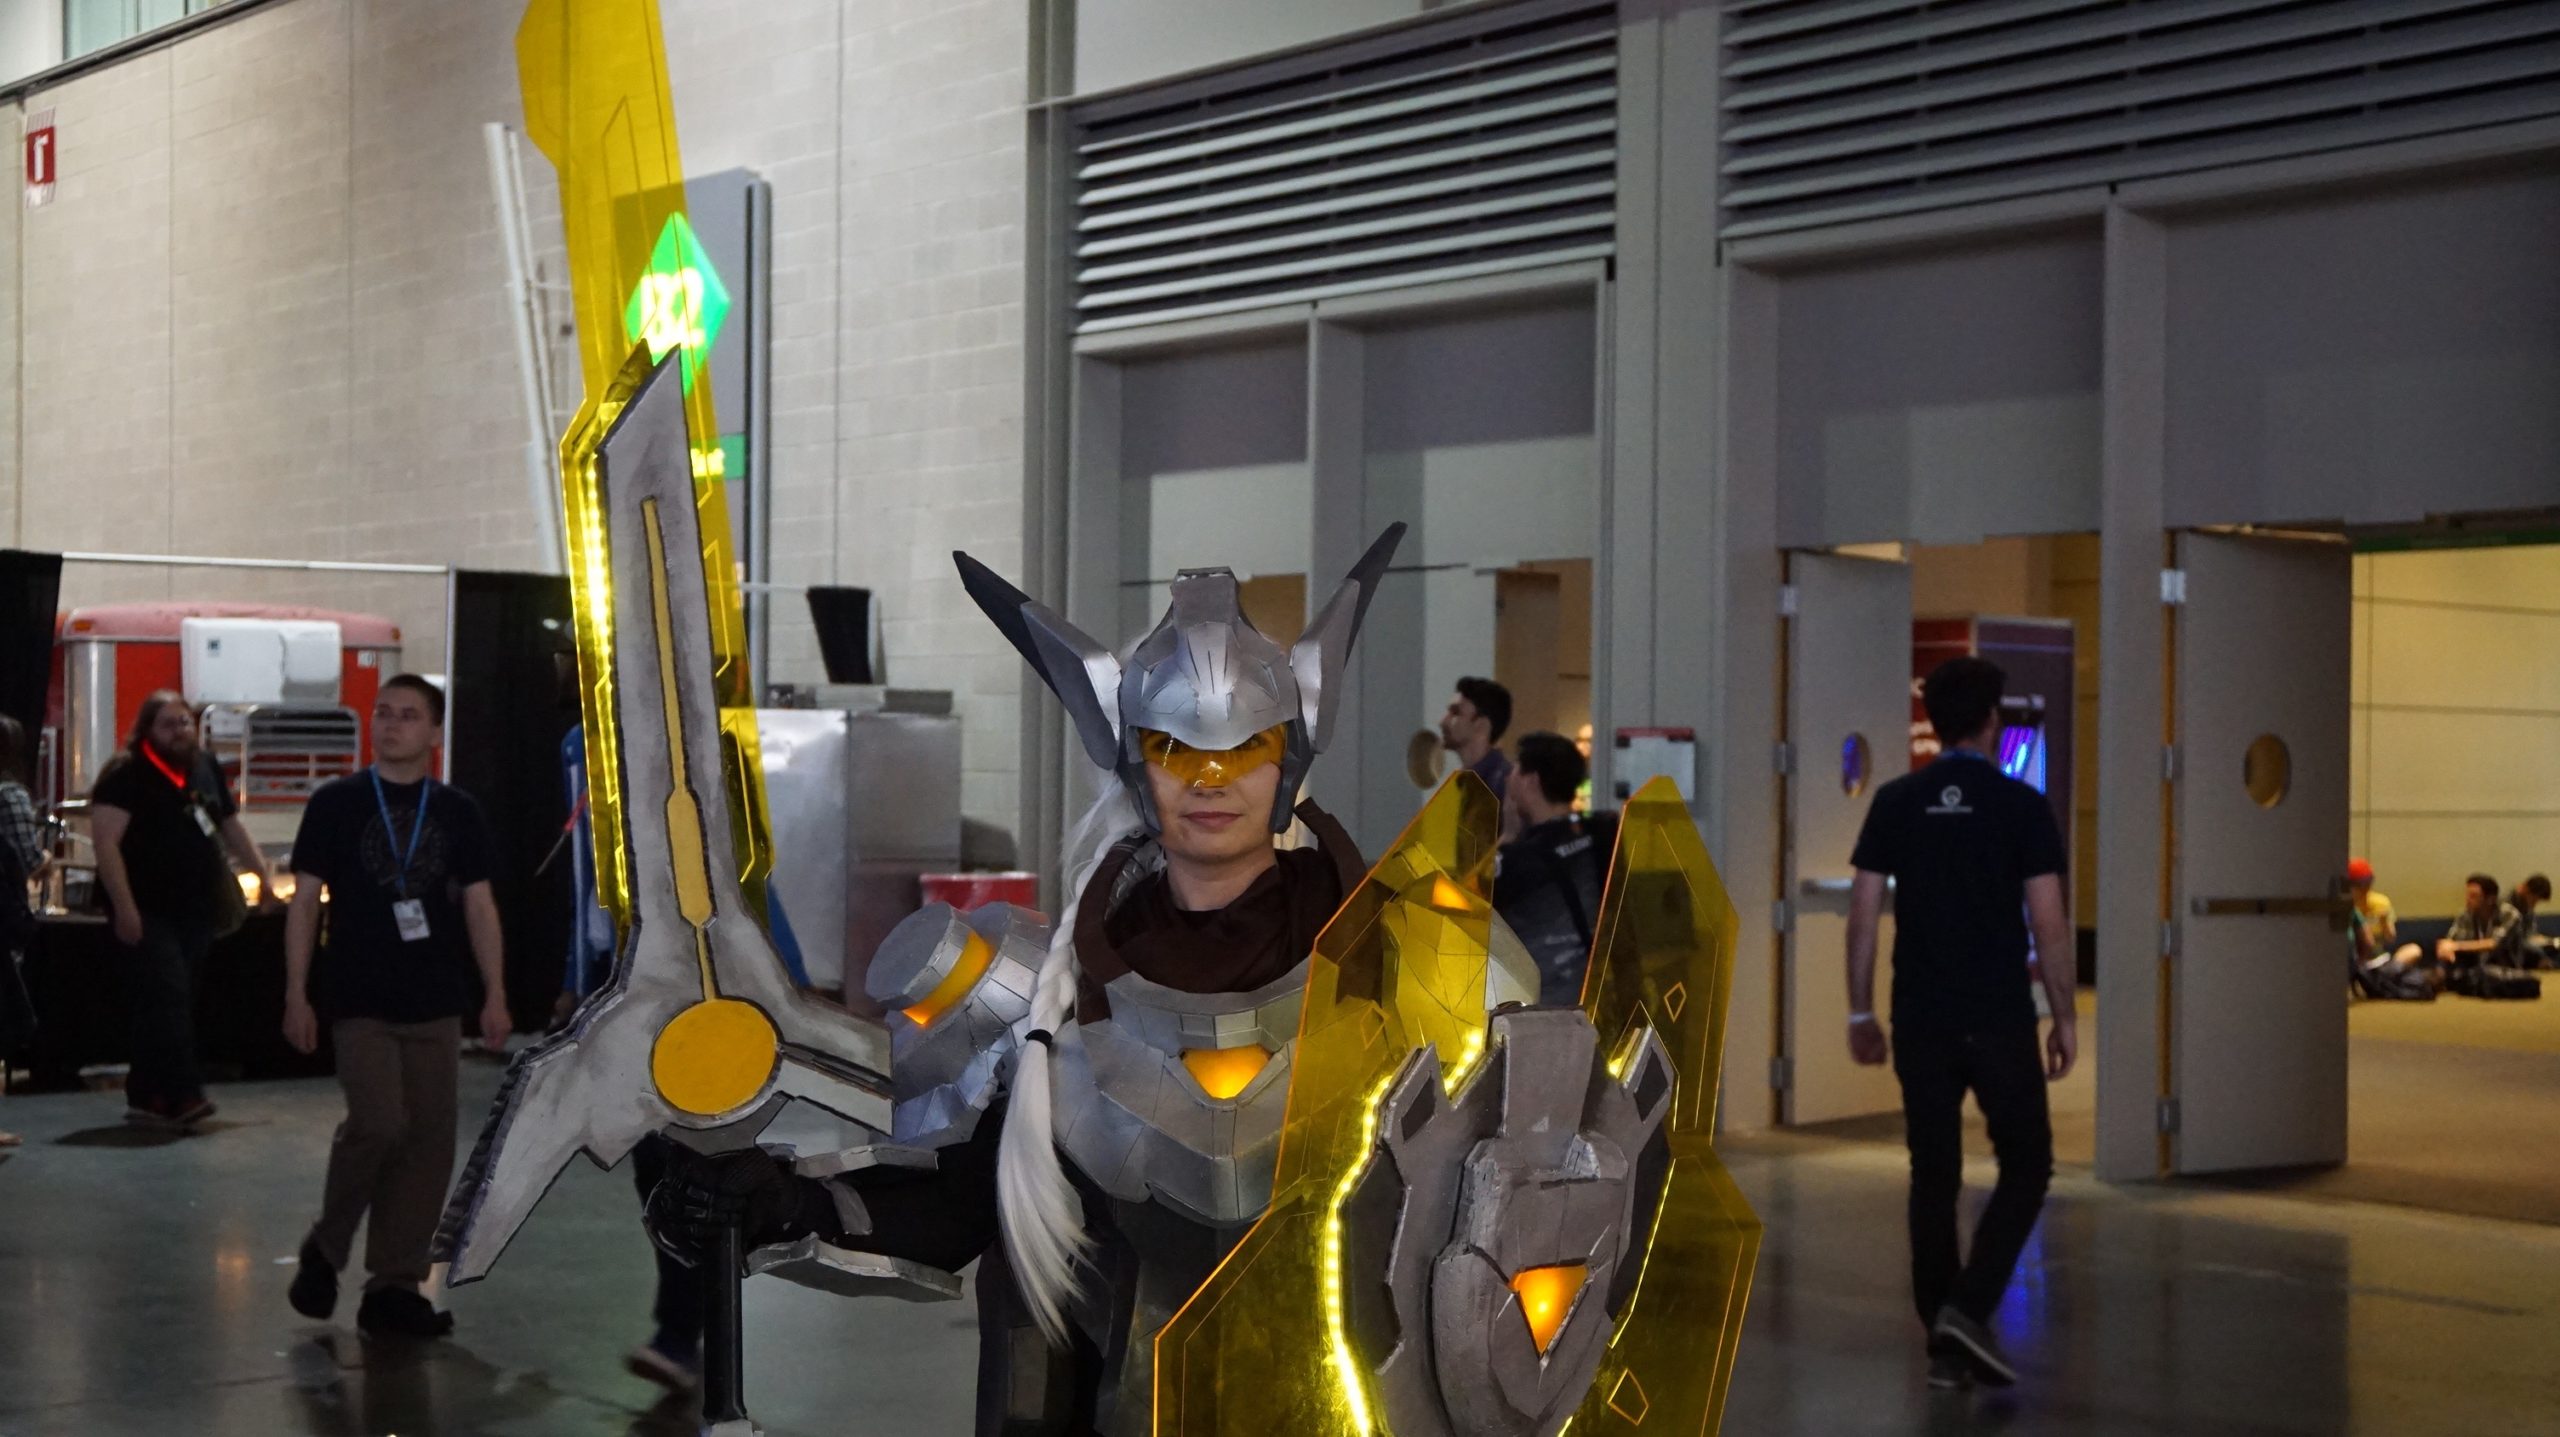 That’s A Lot Of League Of Legends Cosplay